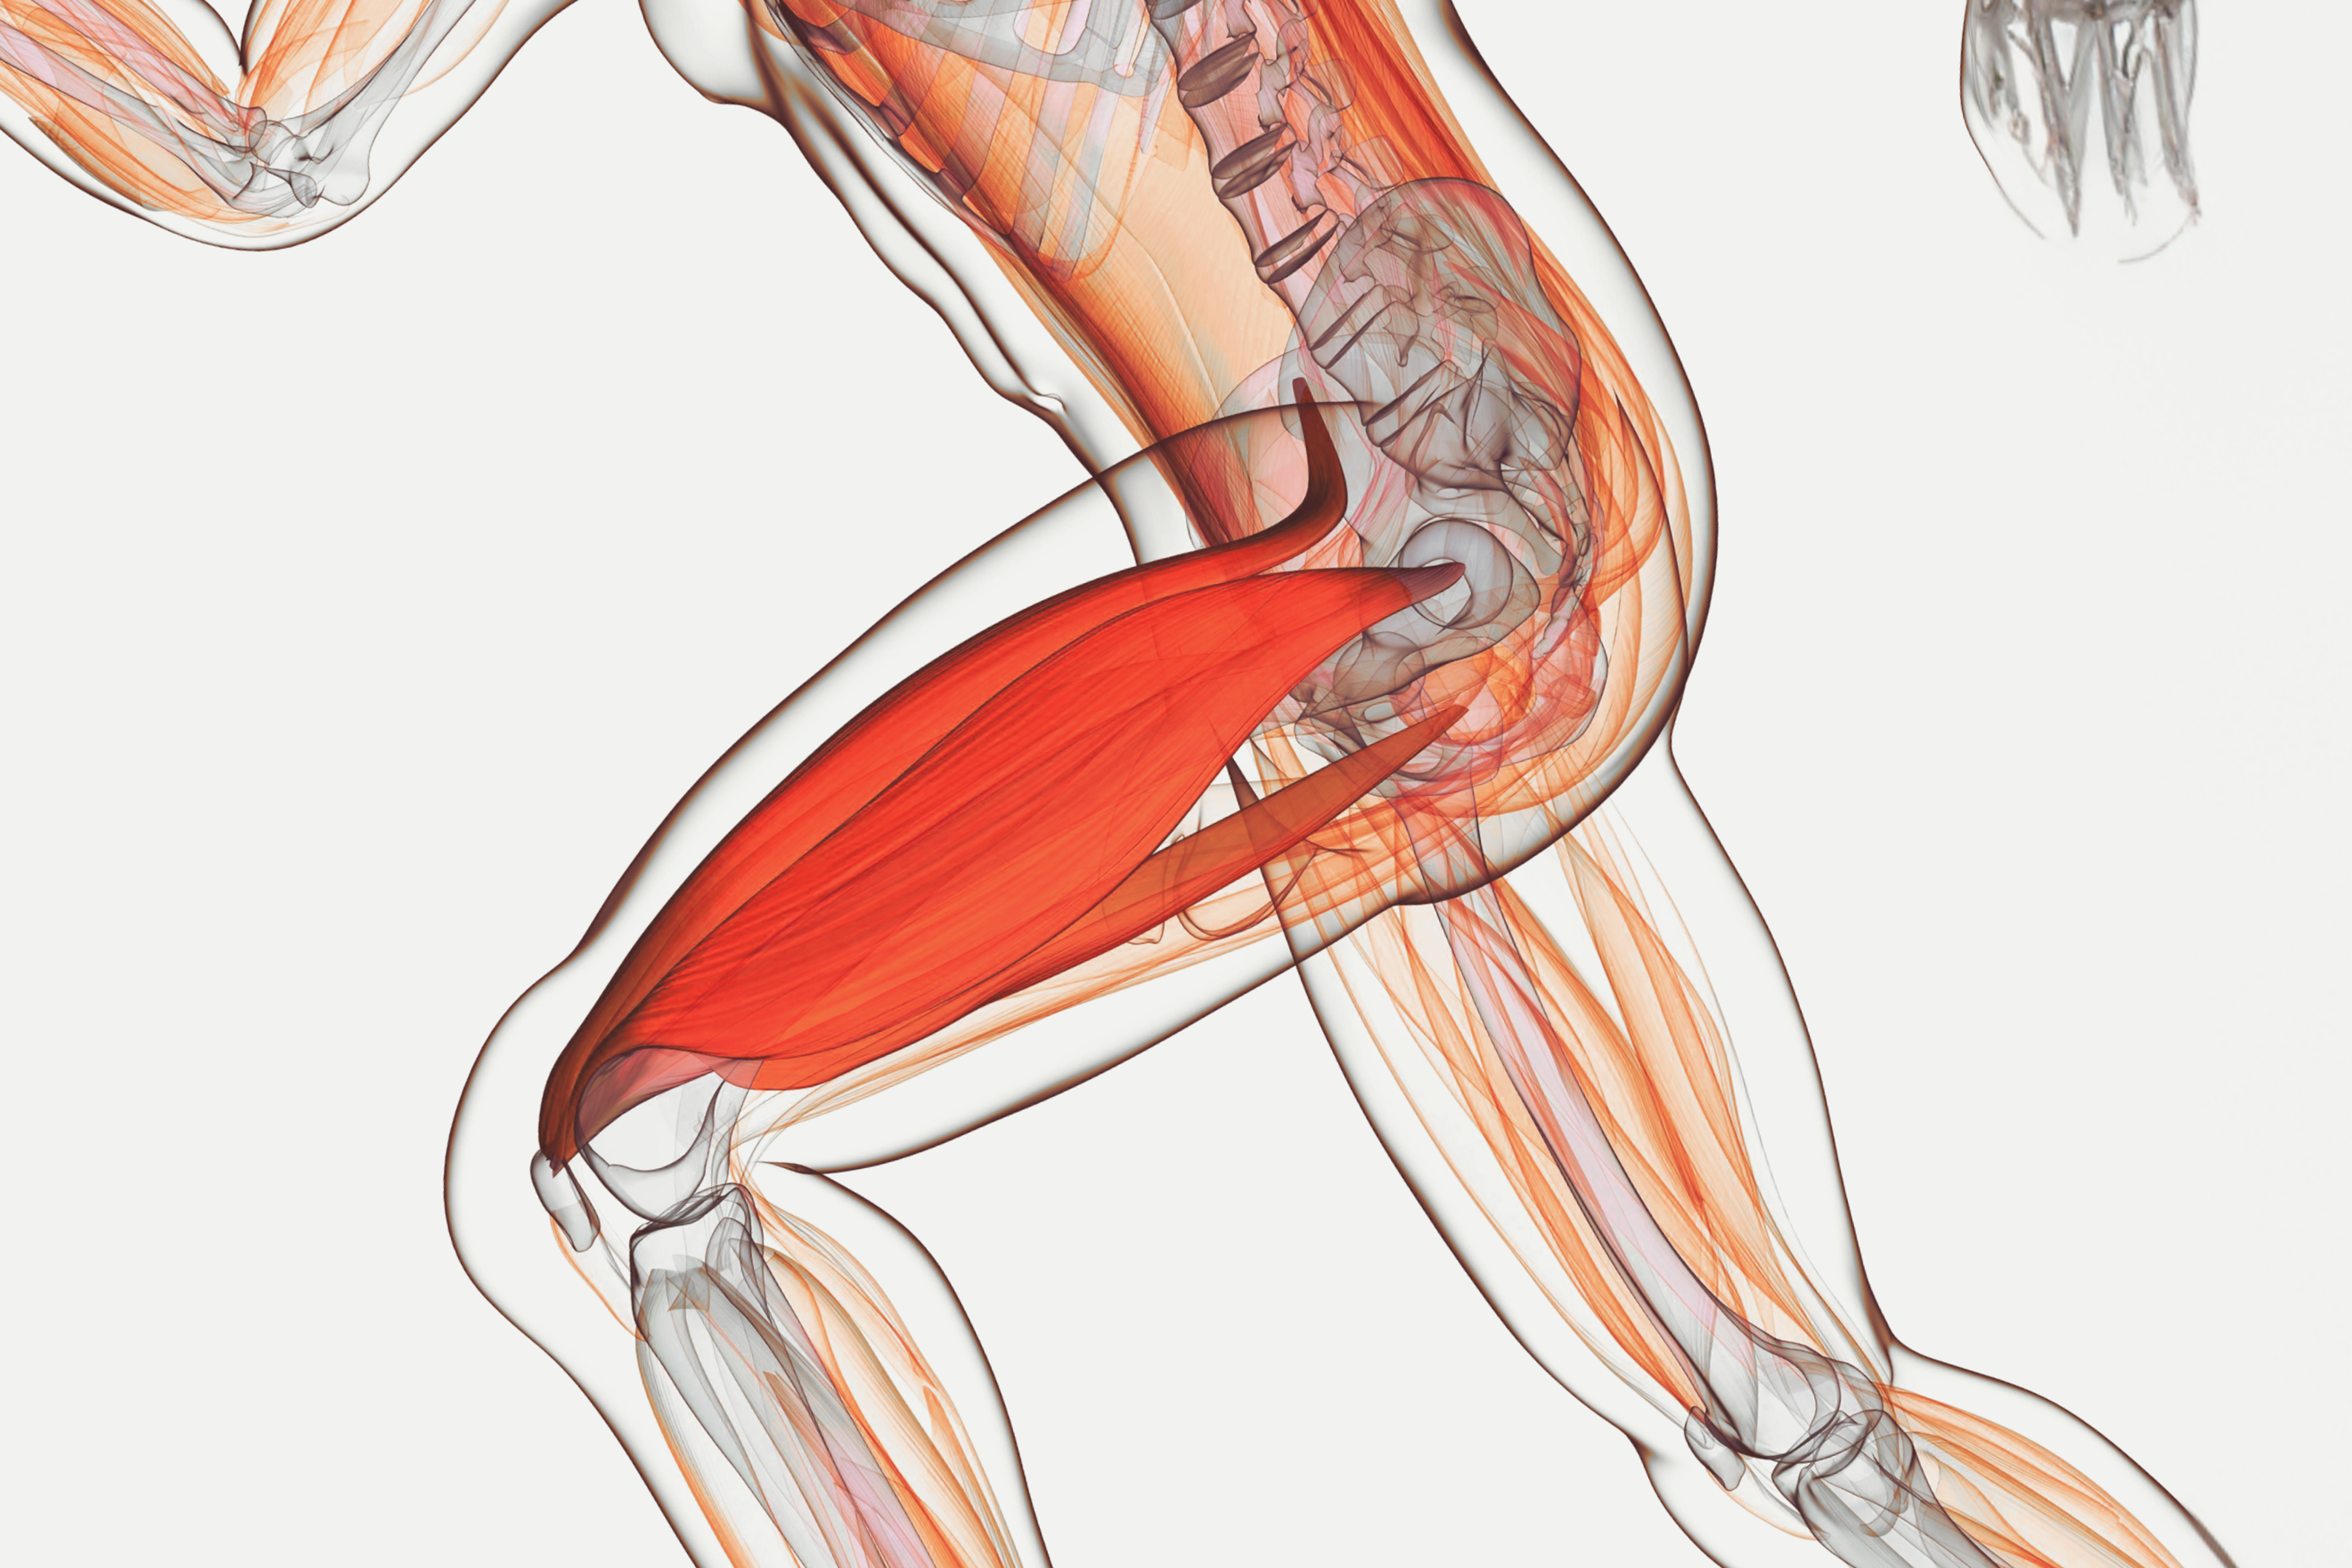 3d representation of muscles and physical activity